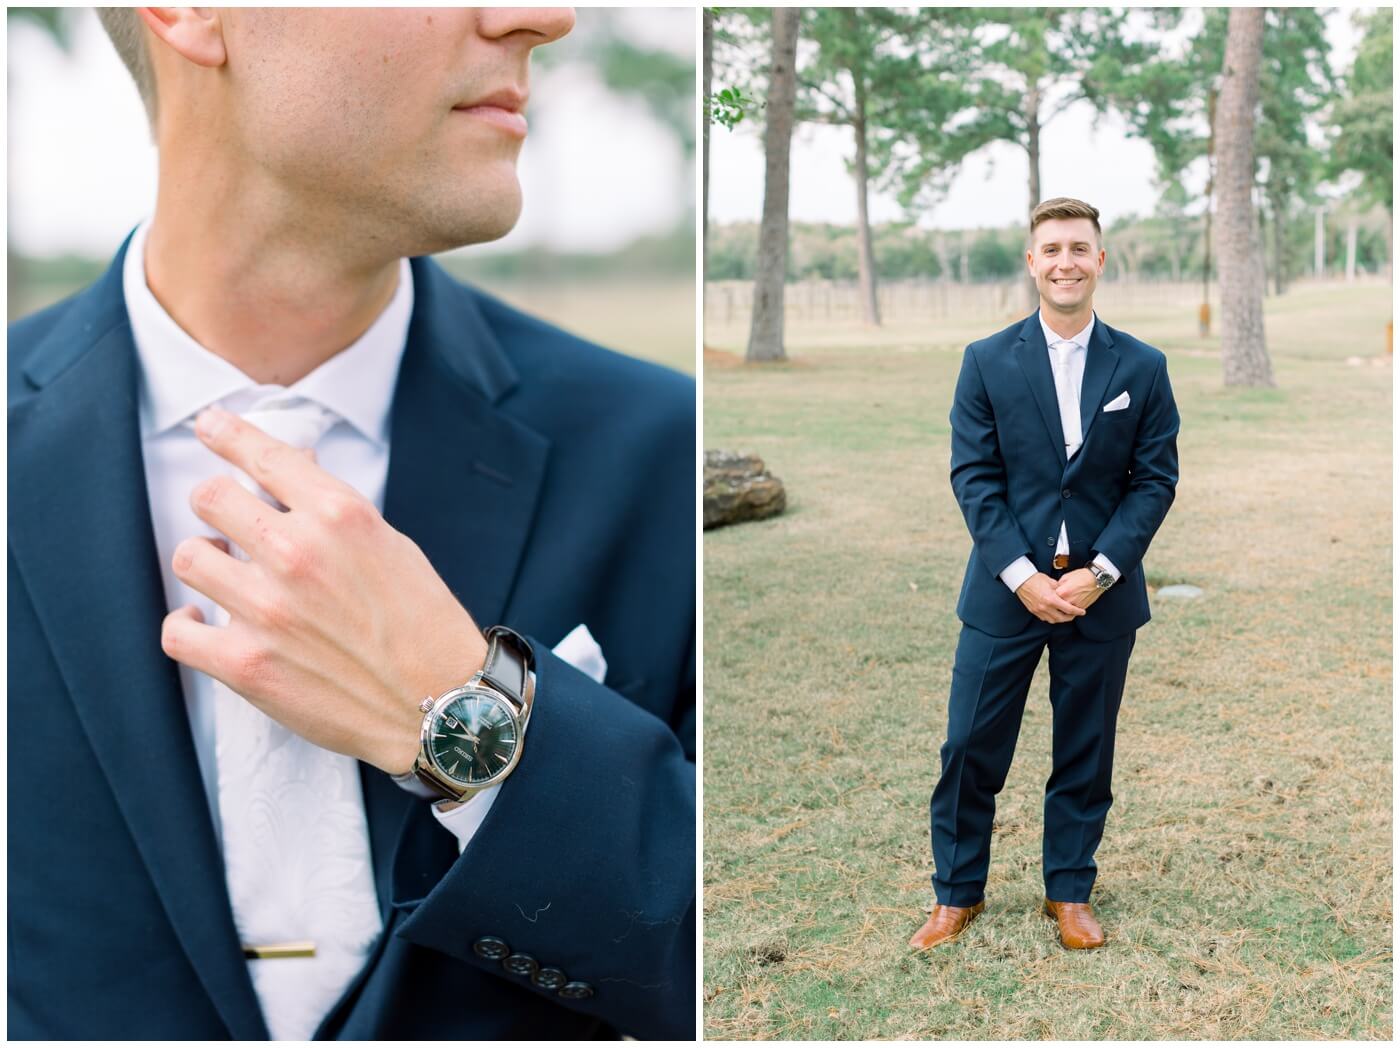 Houston Wedding at The Vine |the groom smiling on his wedding day 